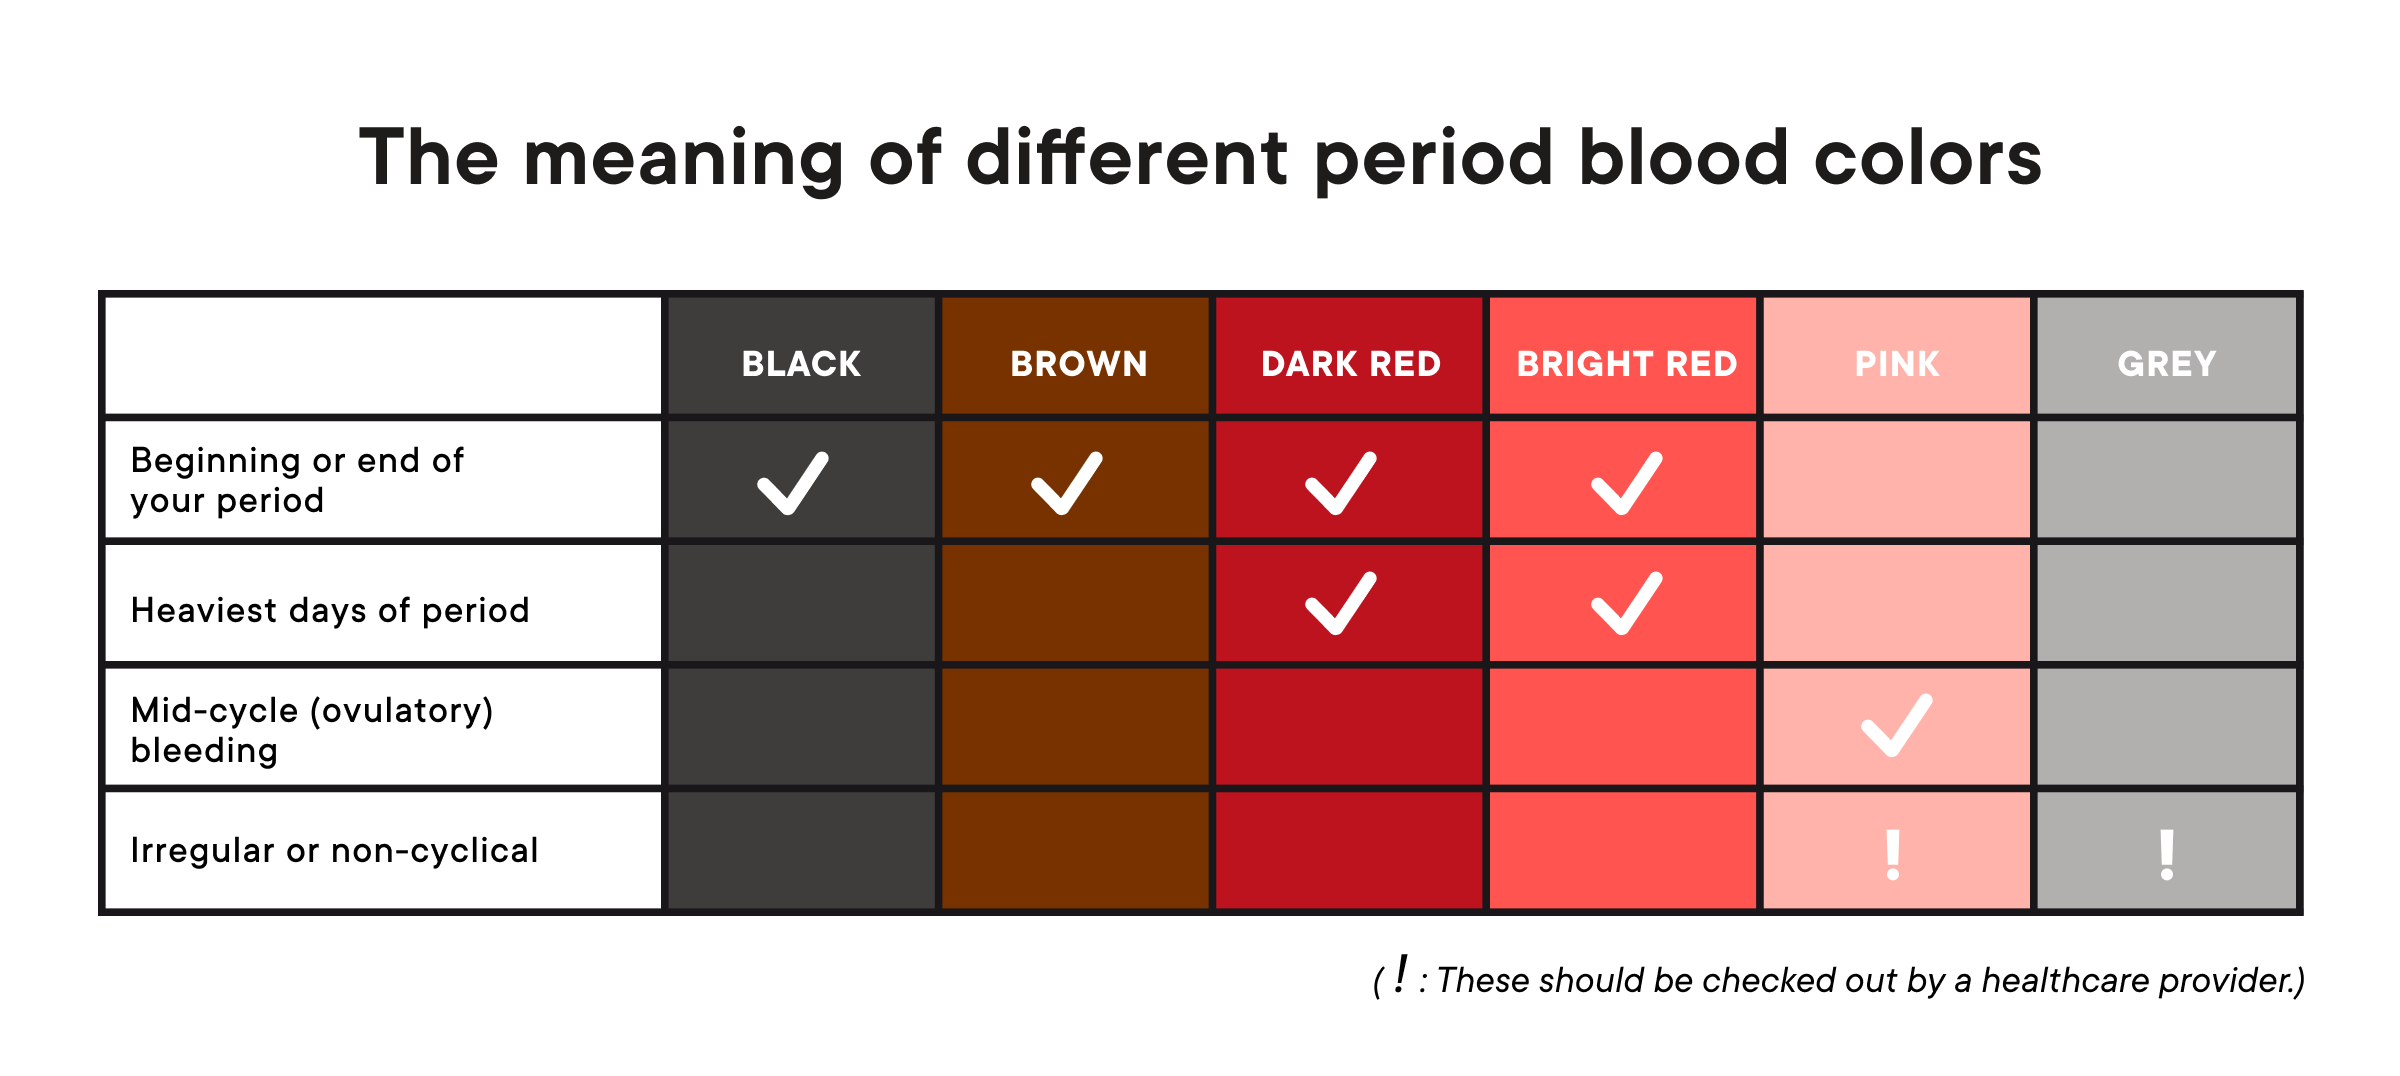 Healthy period blood typically varies from bright red to dark